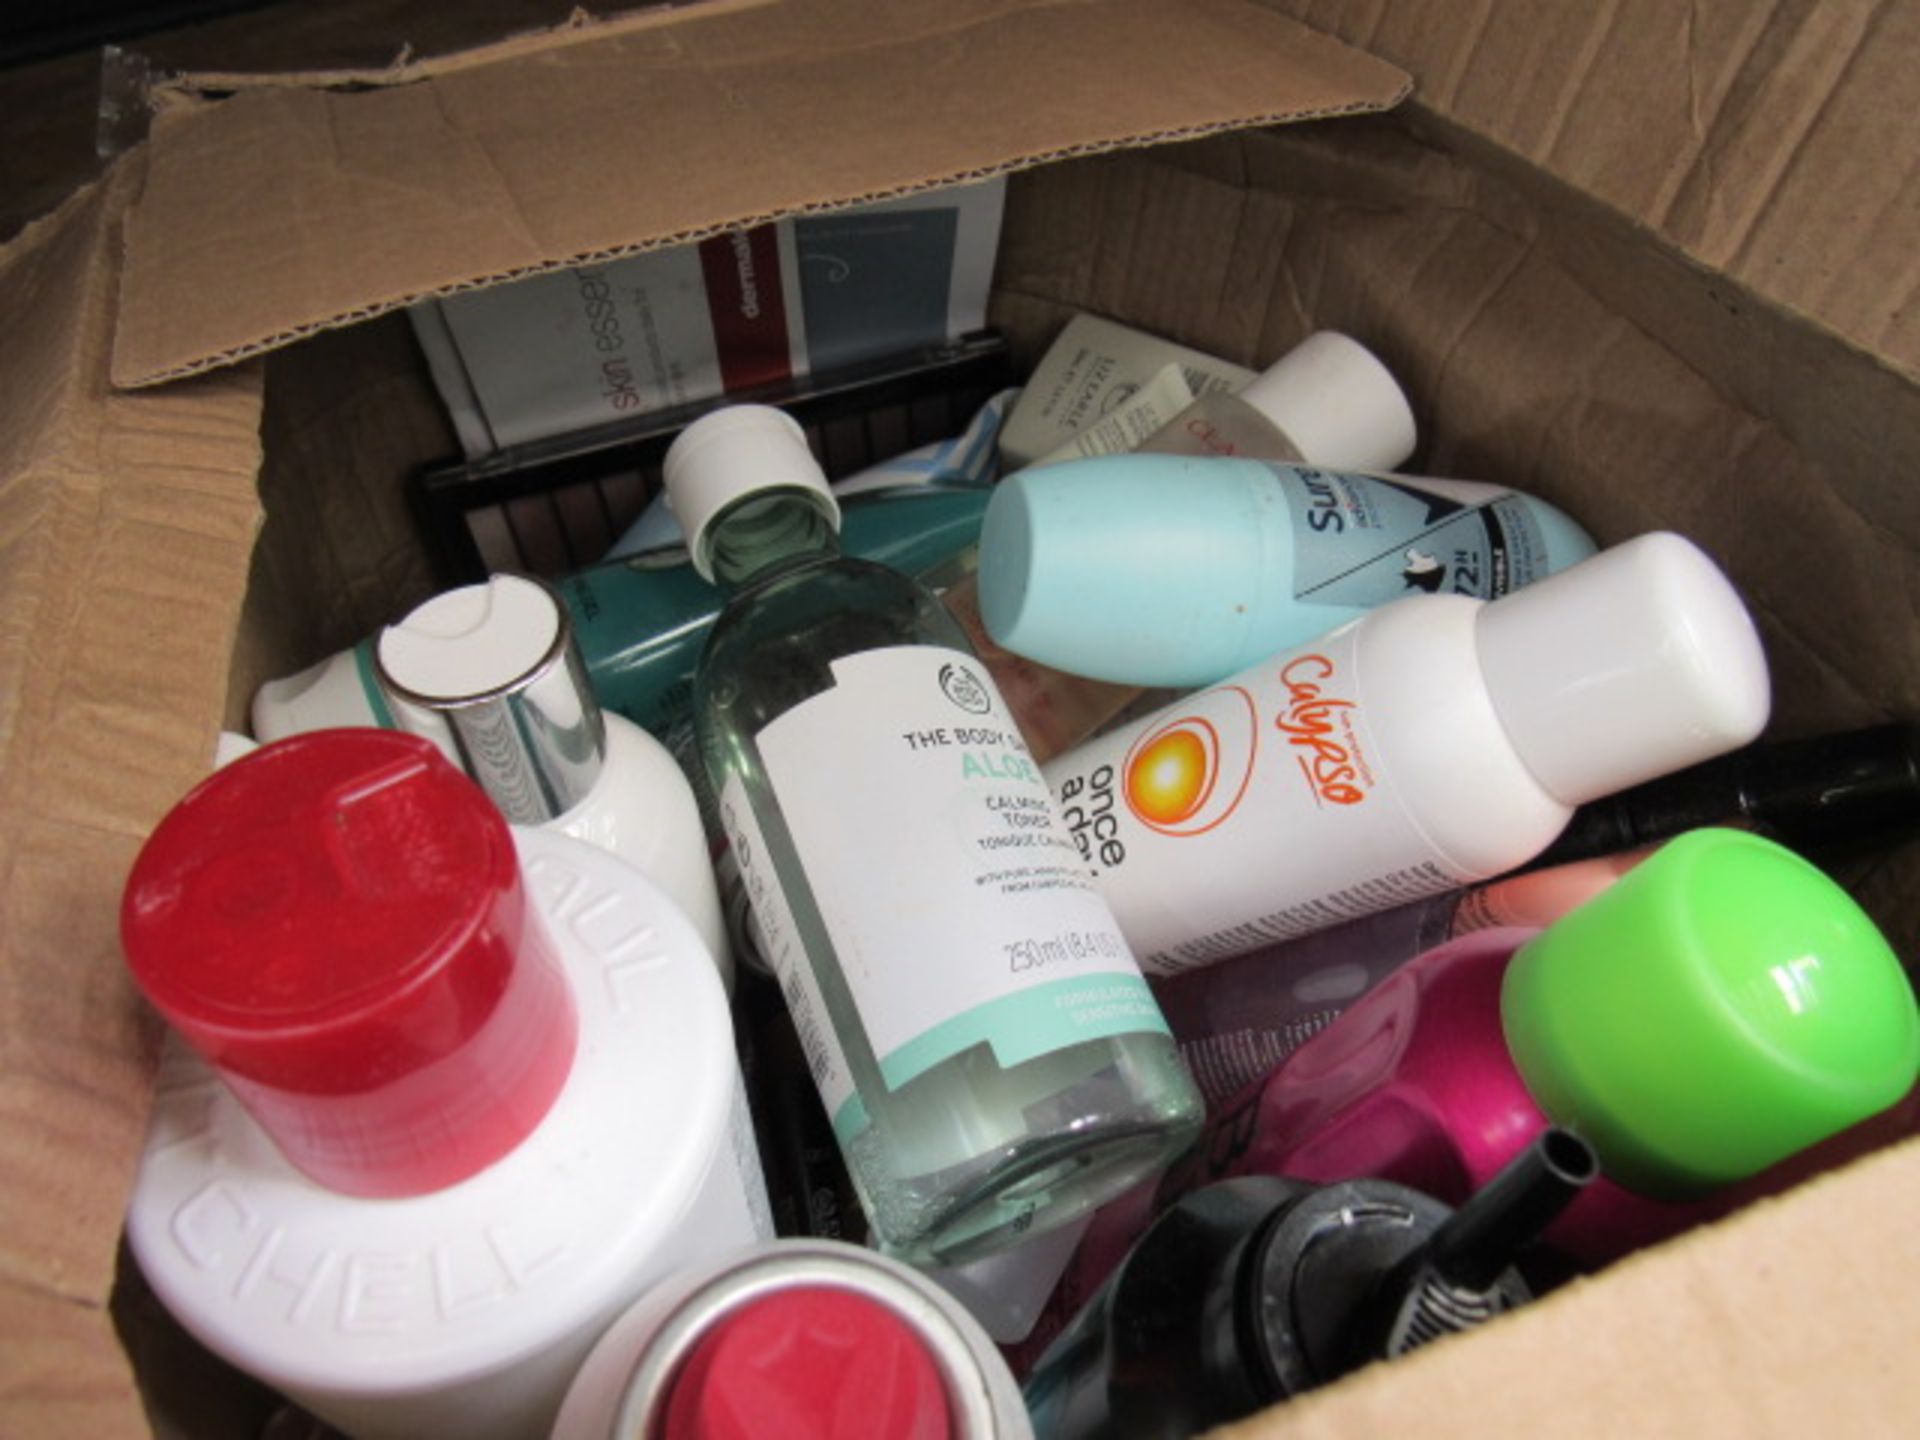 Small box with creams, sprays, ointments, etc